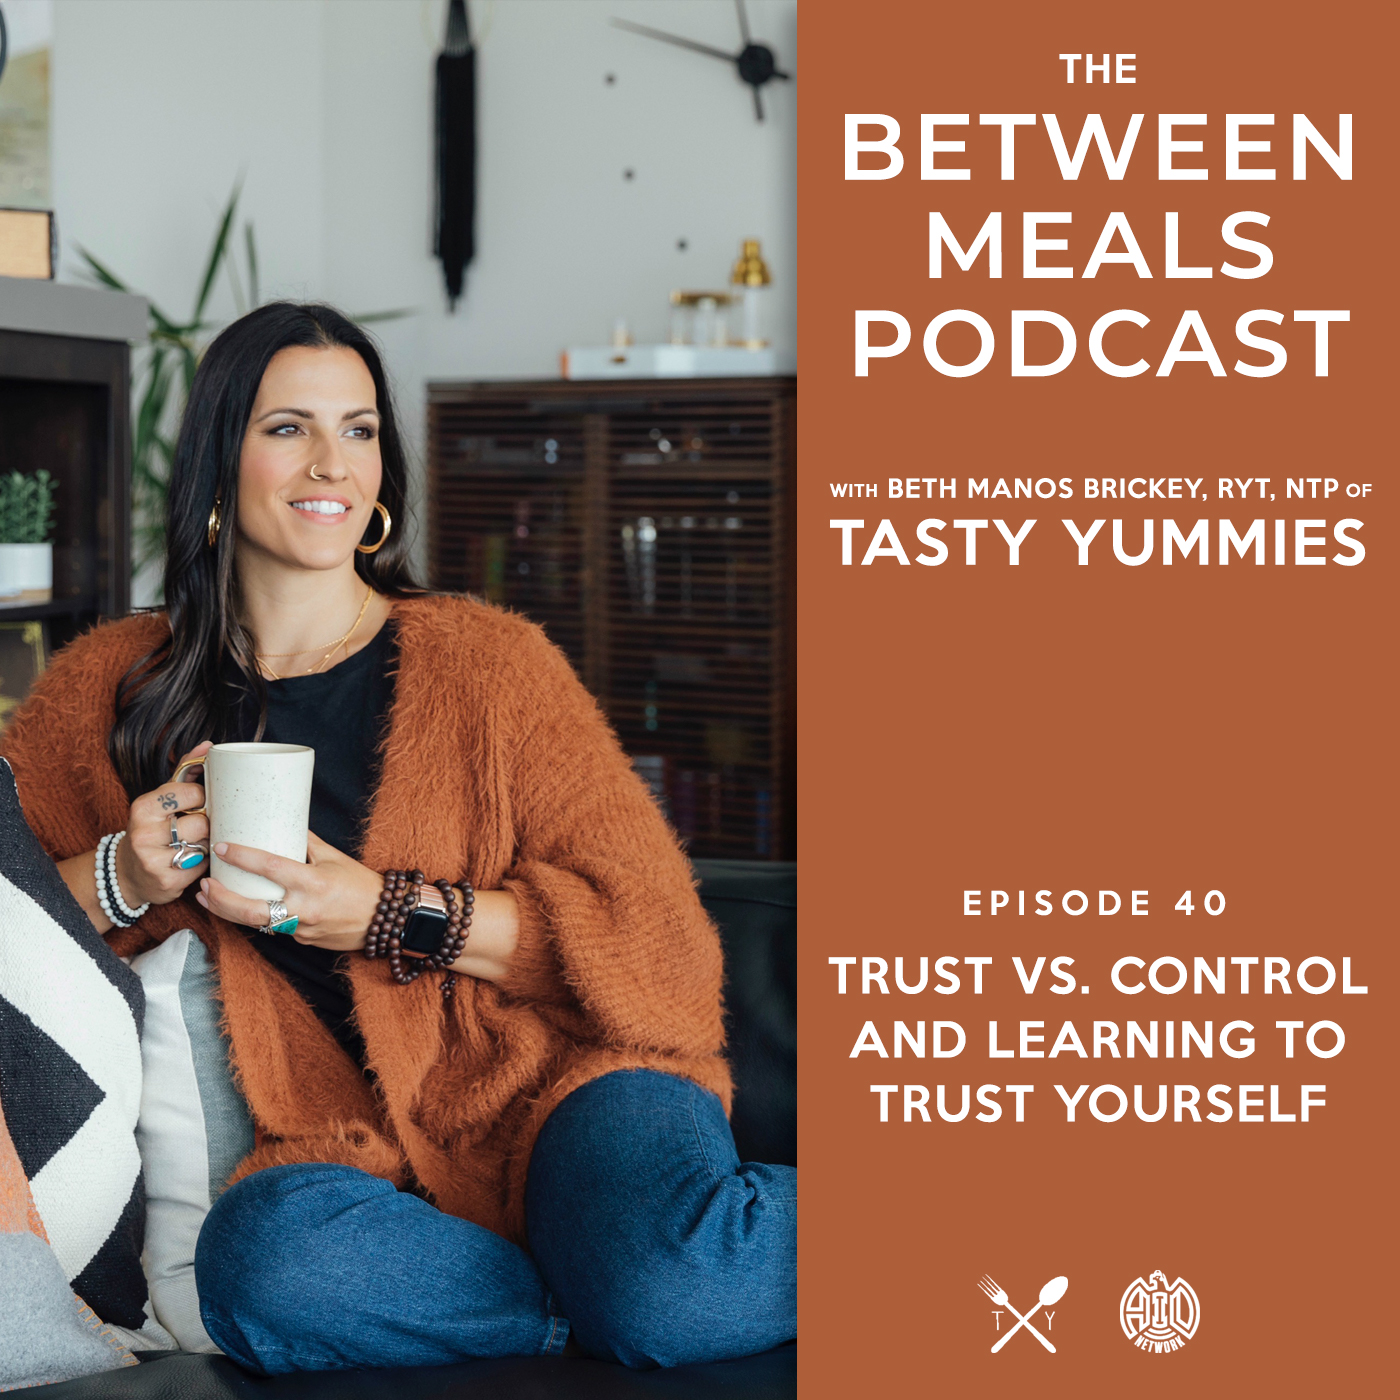 Between Meals Podcast. Episode 40: Trust vs. Control and Learning How to Trust Yourself